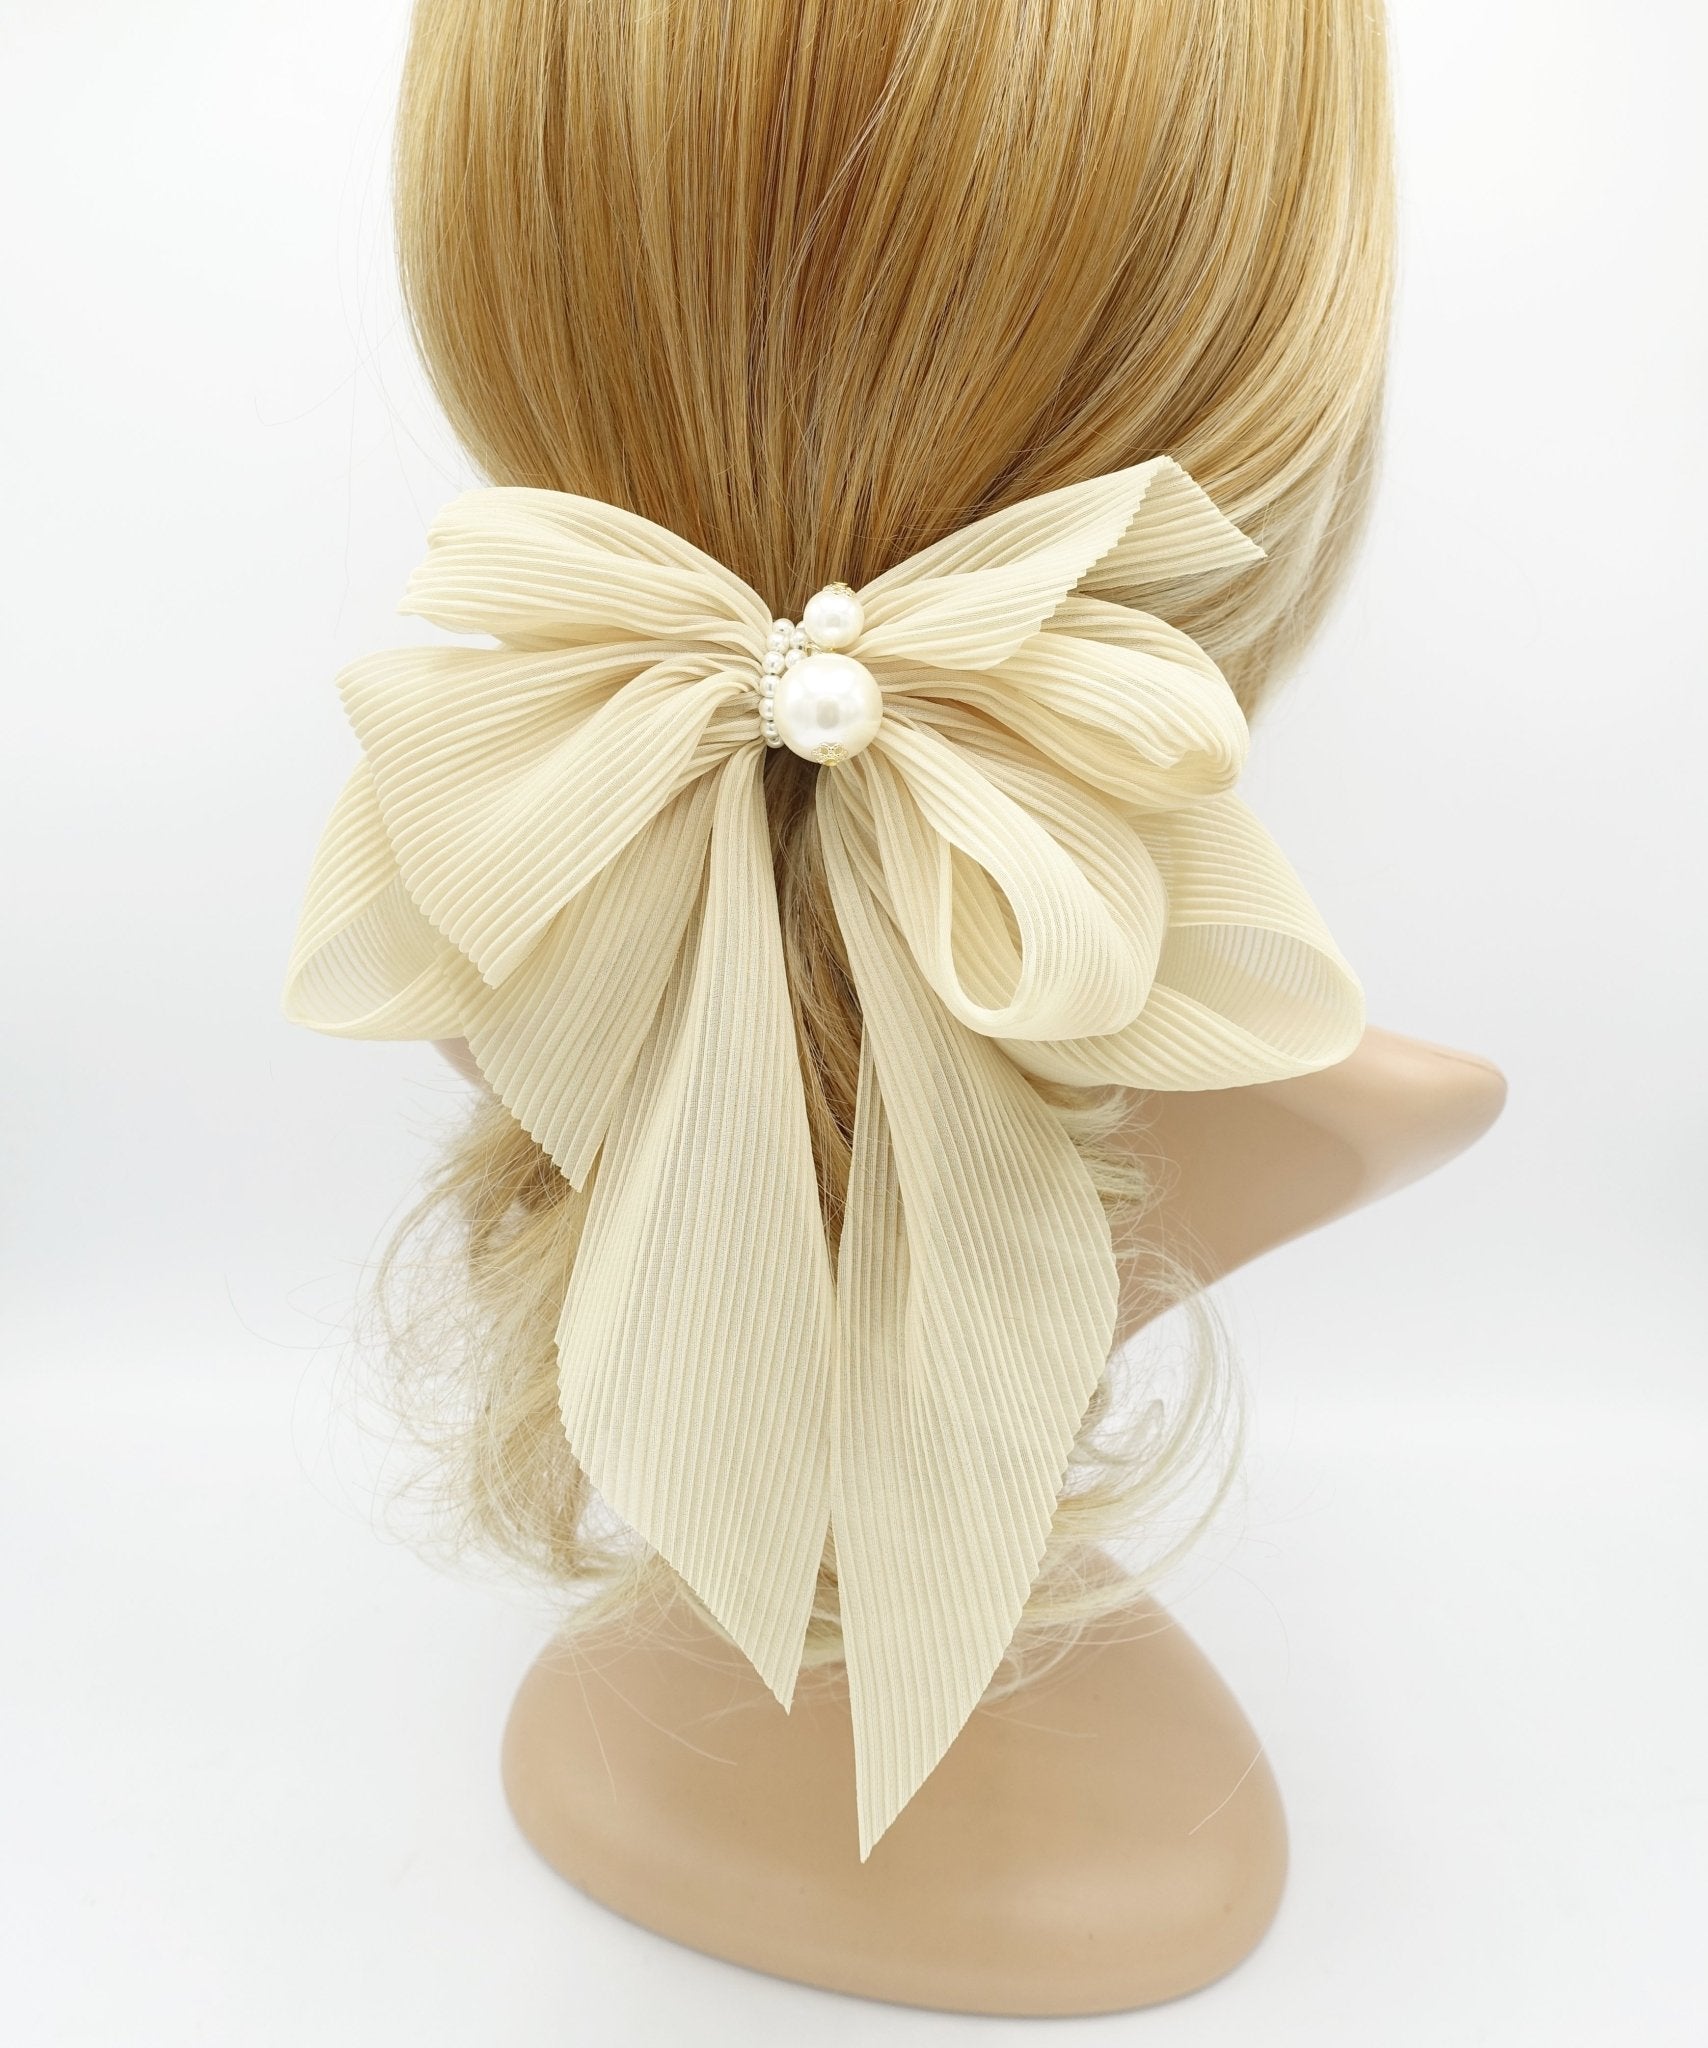 veryshine.com claw/banana/barrette Beige pleated chiffon hair bow pearl embellished long tail french barrette women hair accessory